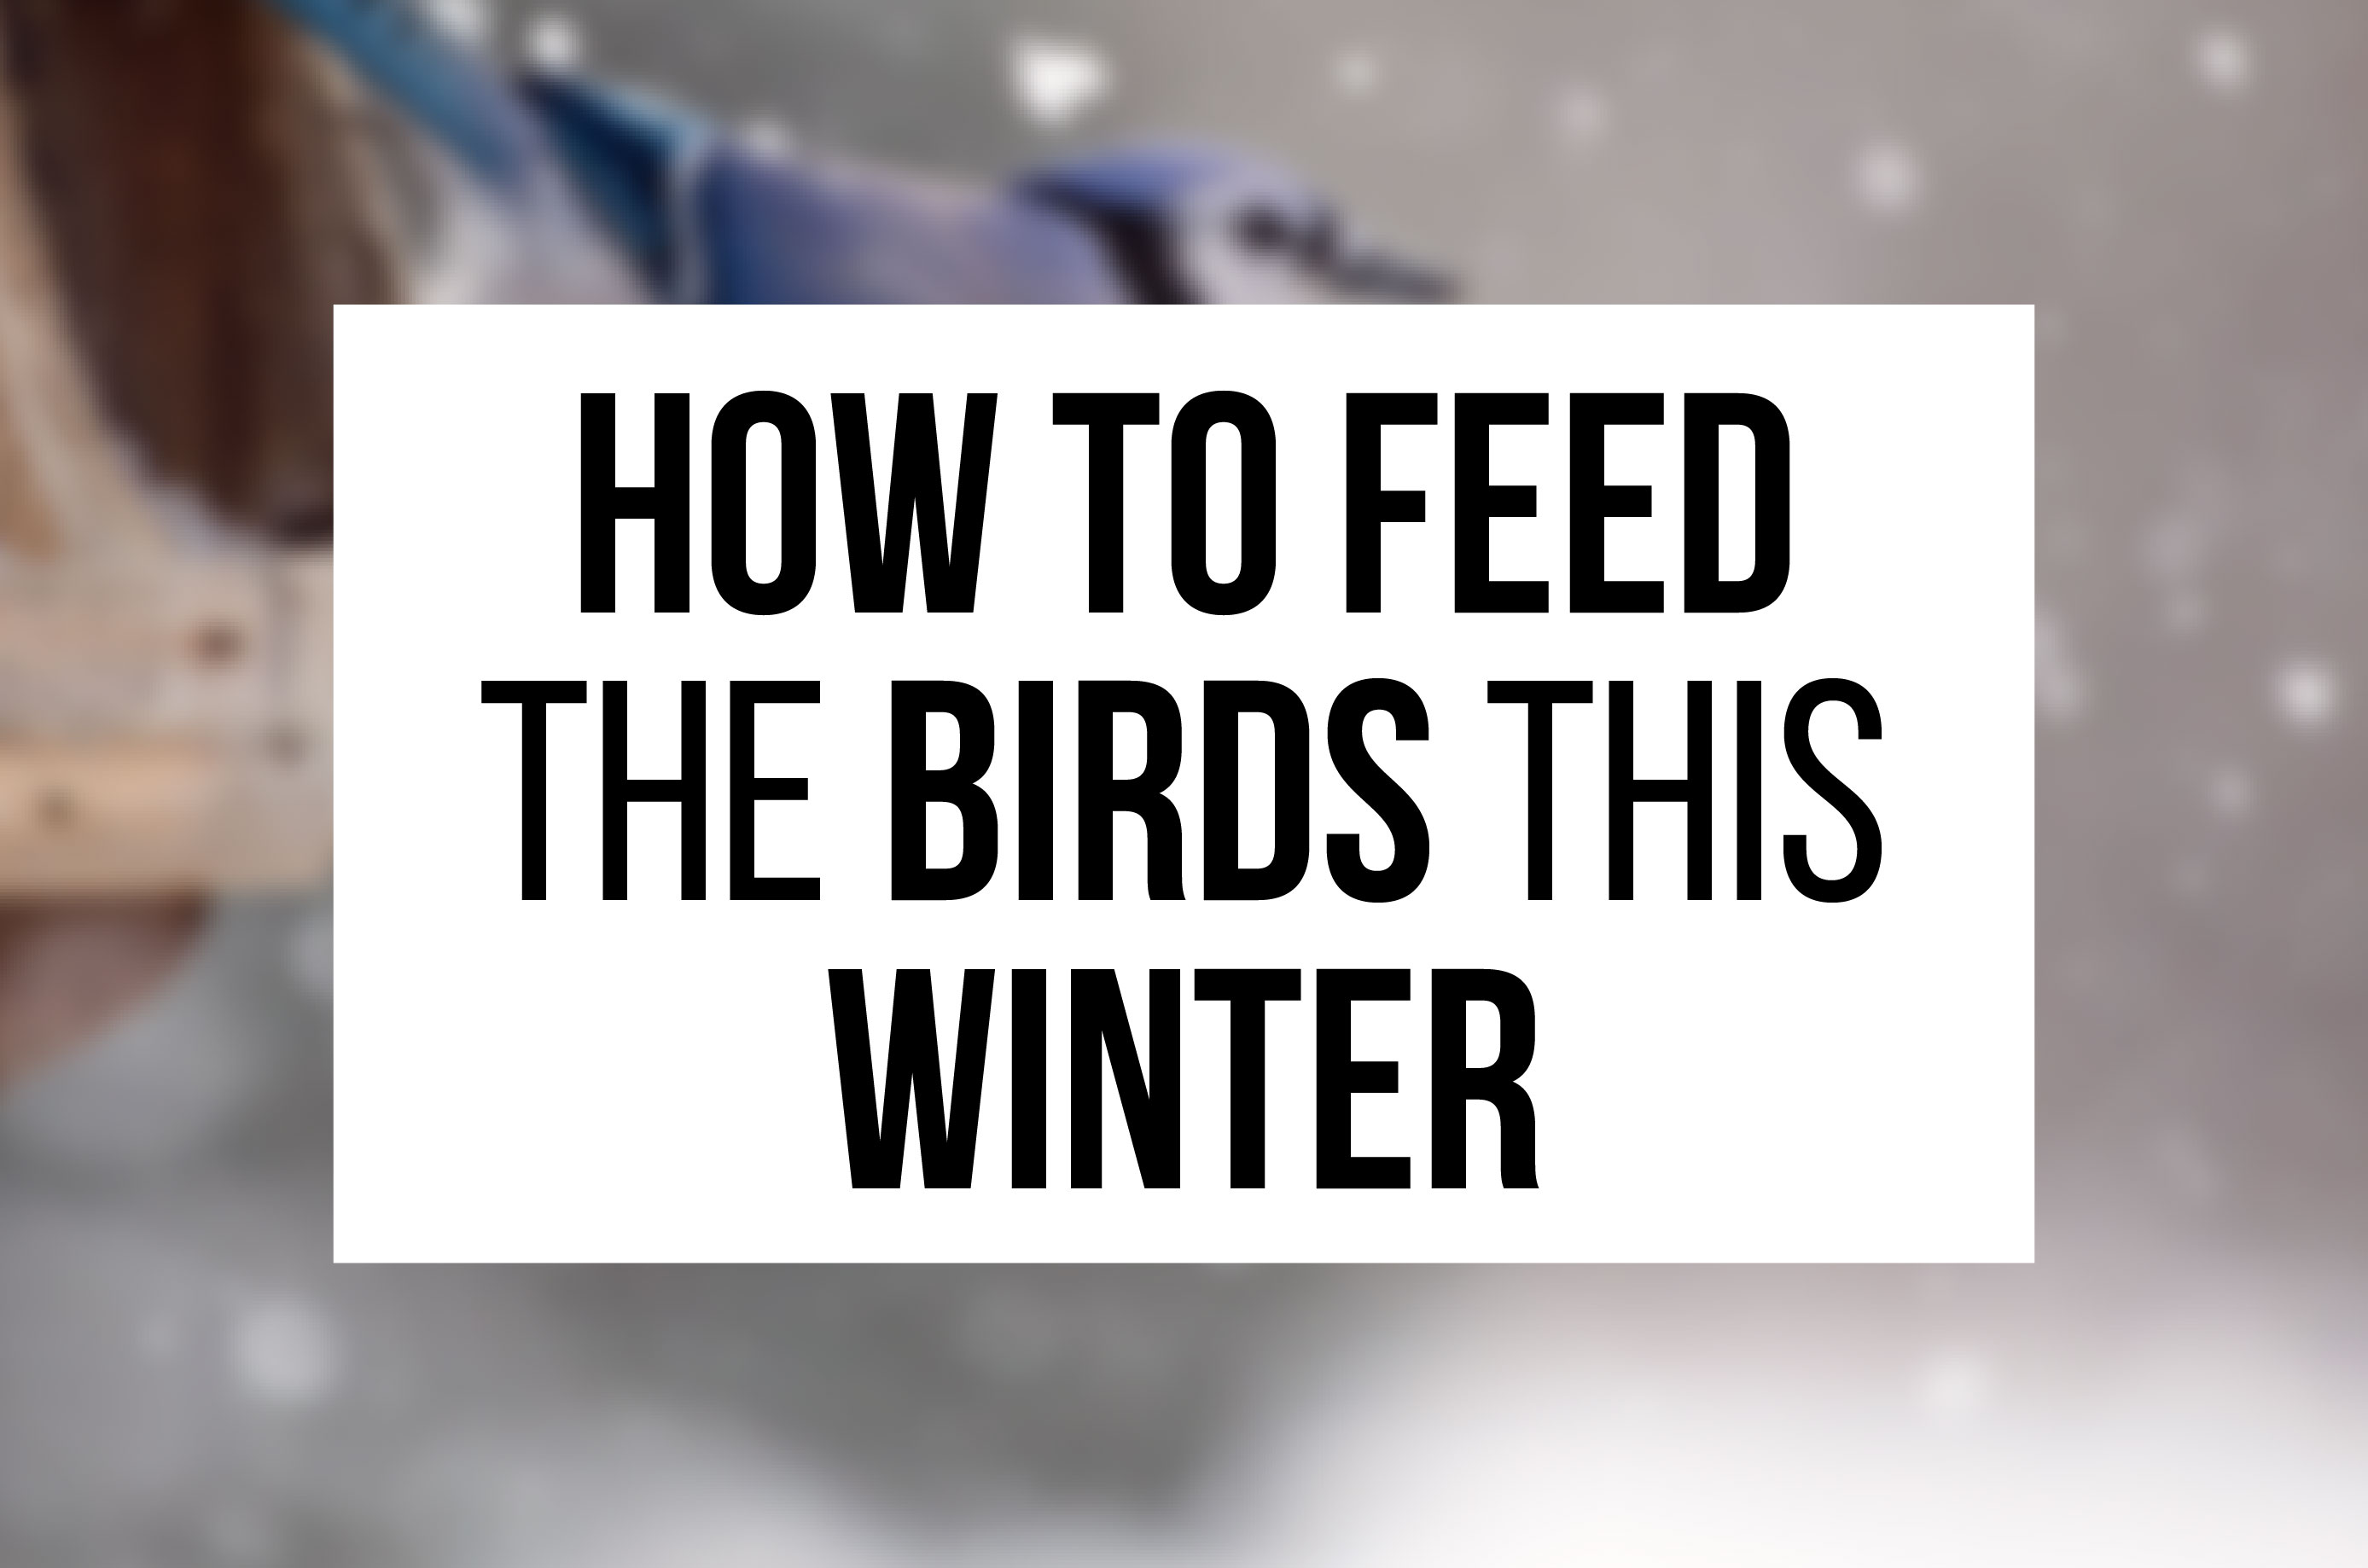 How to feed the birds this winter